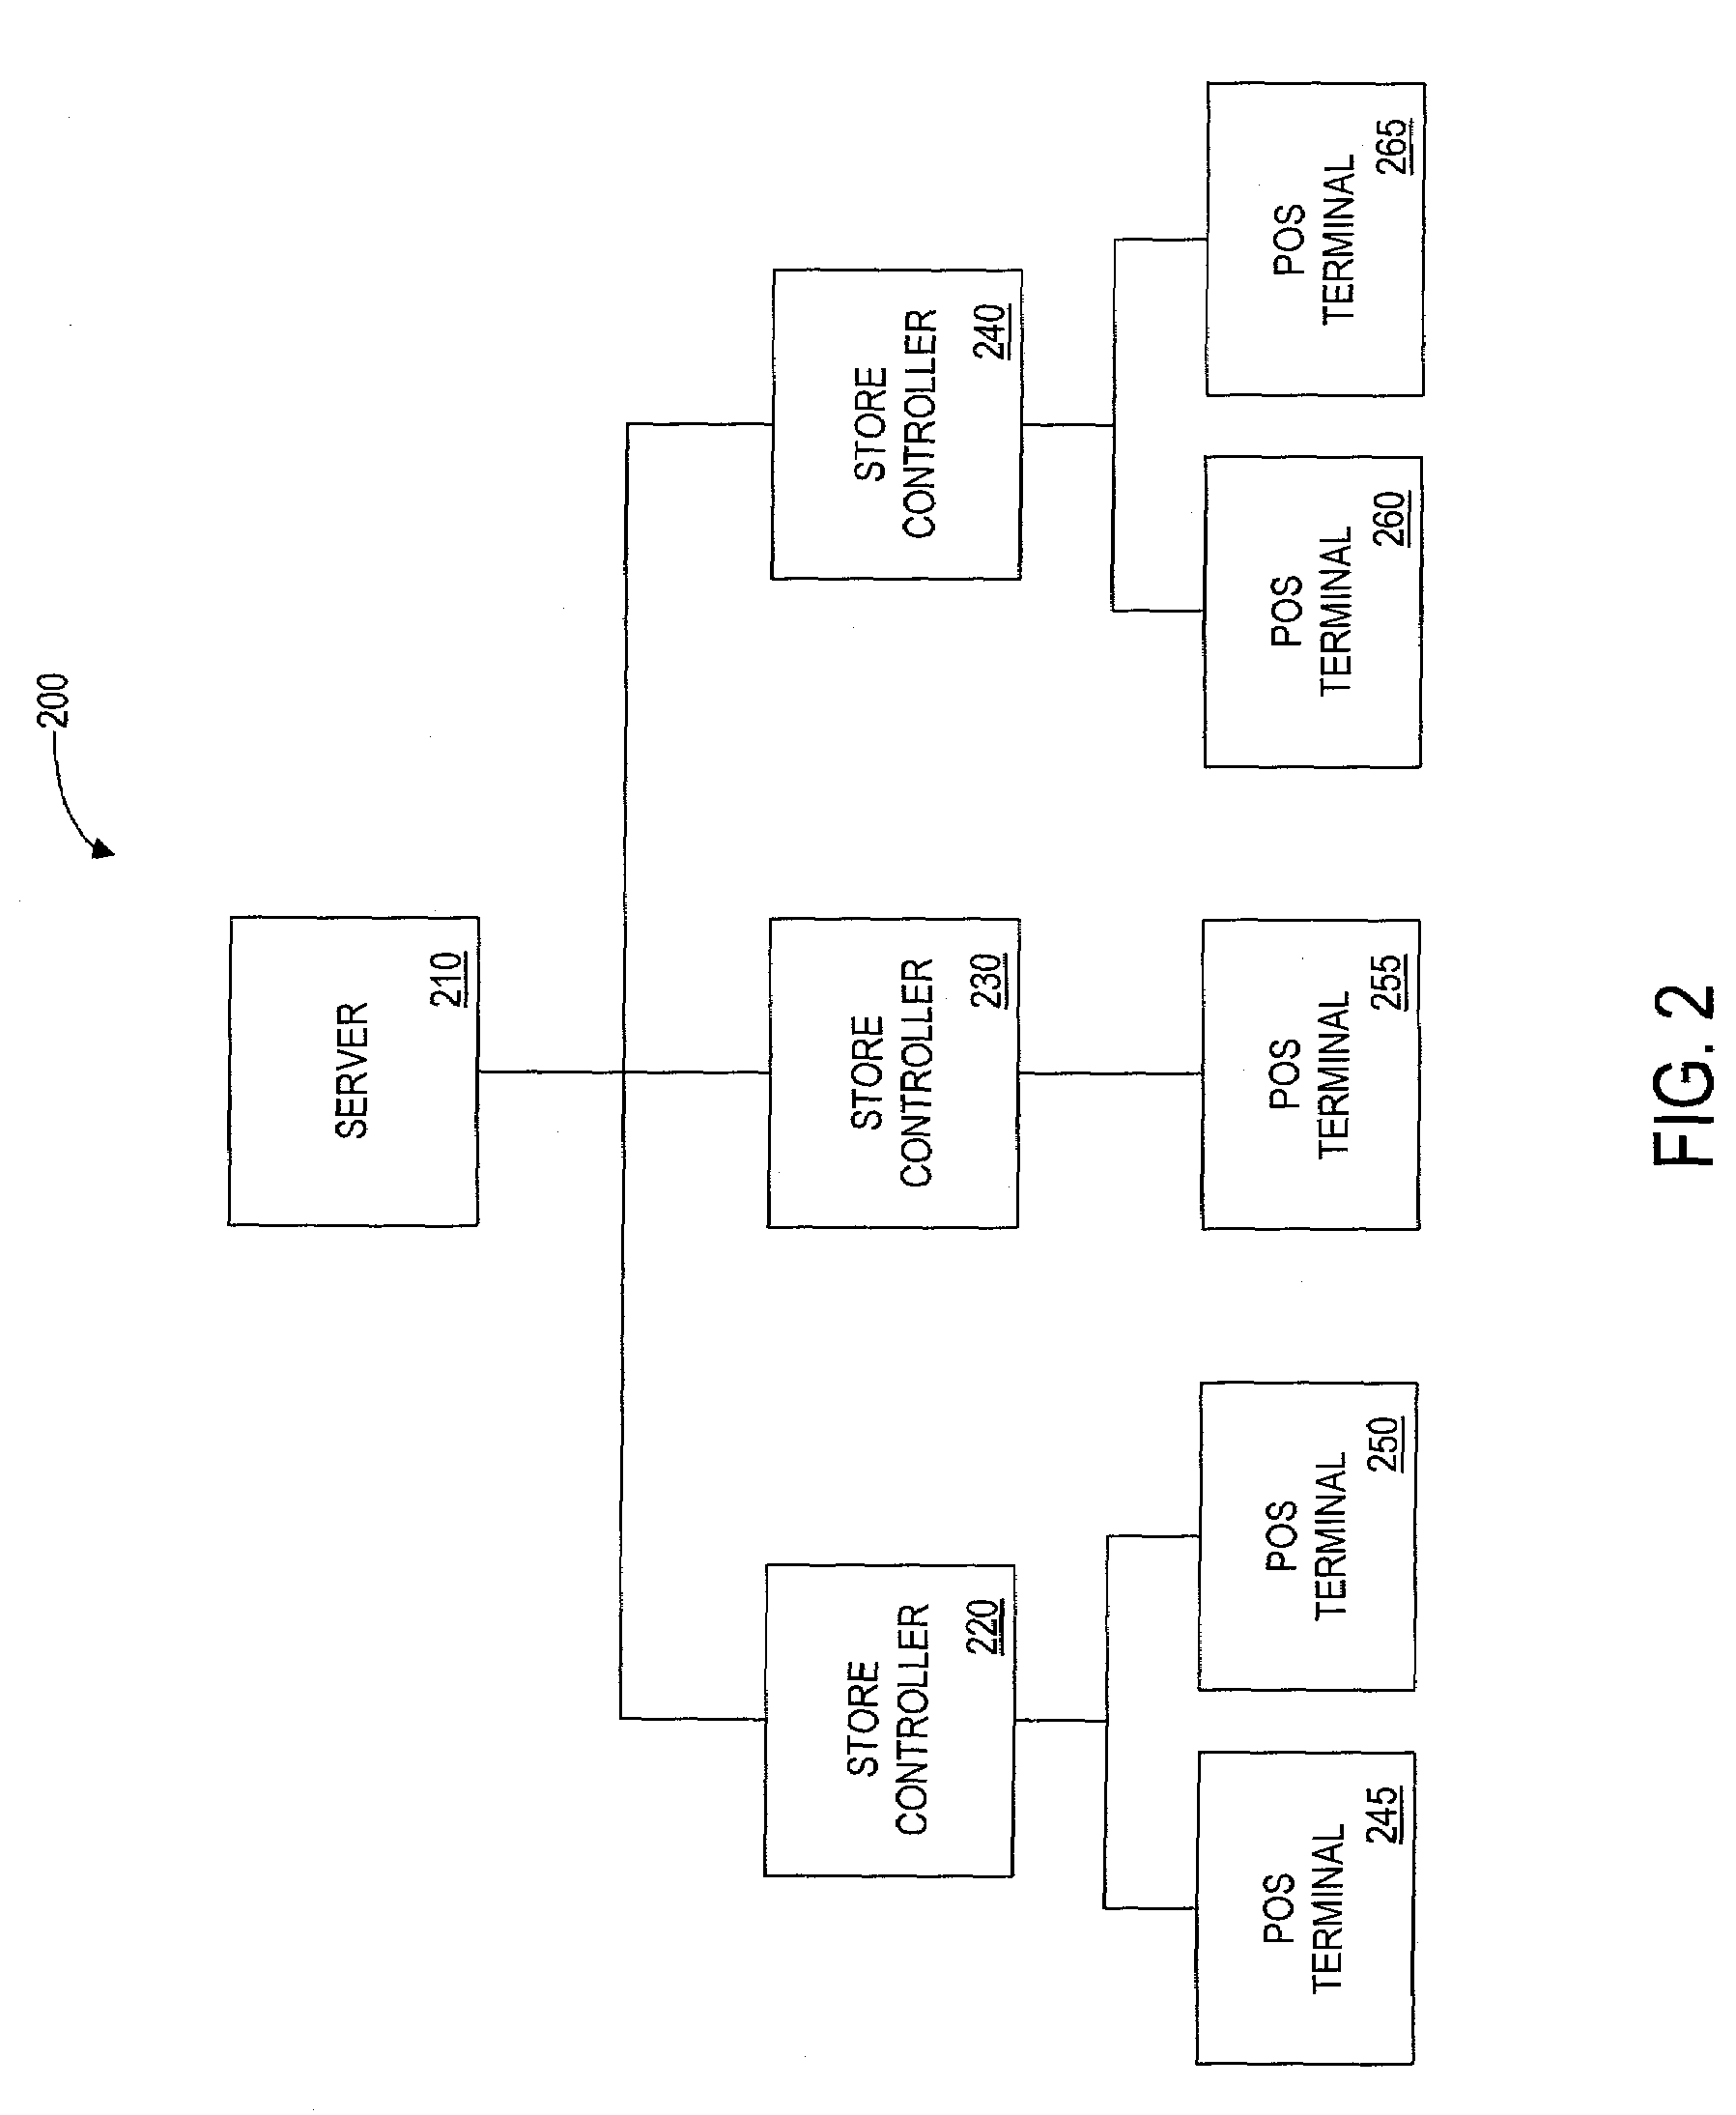 Method and apparatus for defining routing of customers between merchants